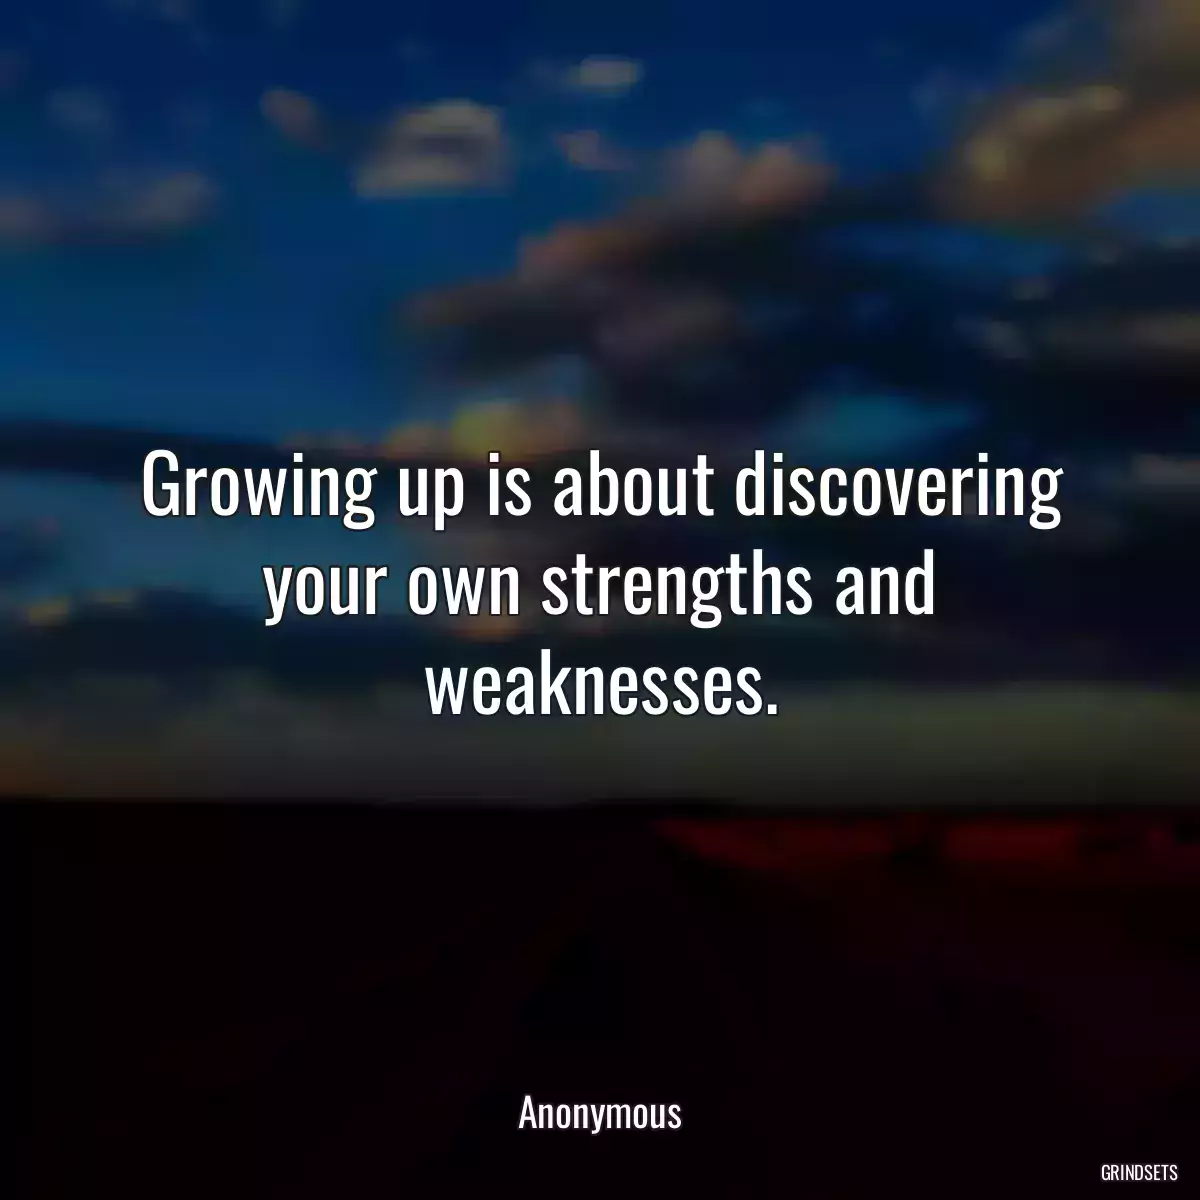 Growing up is about discovering your own strengths and weaknesses.